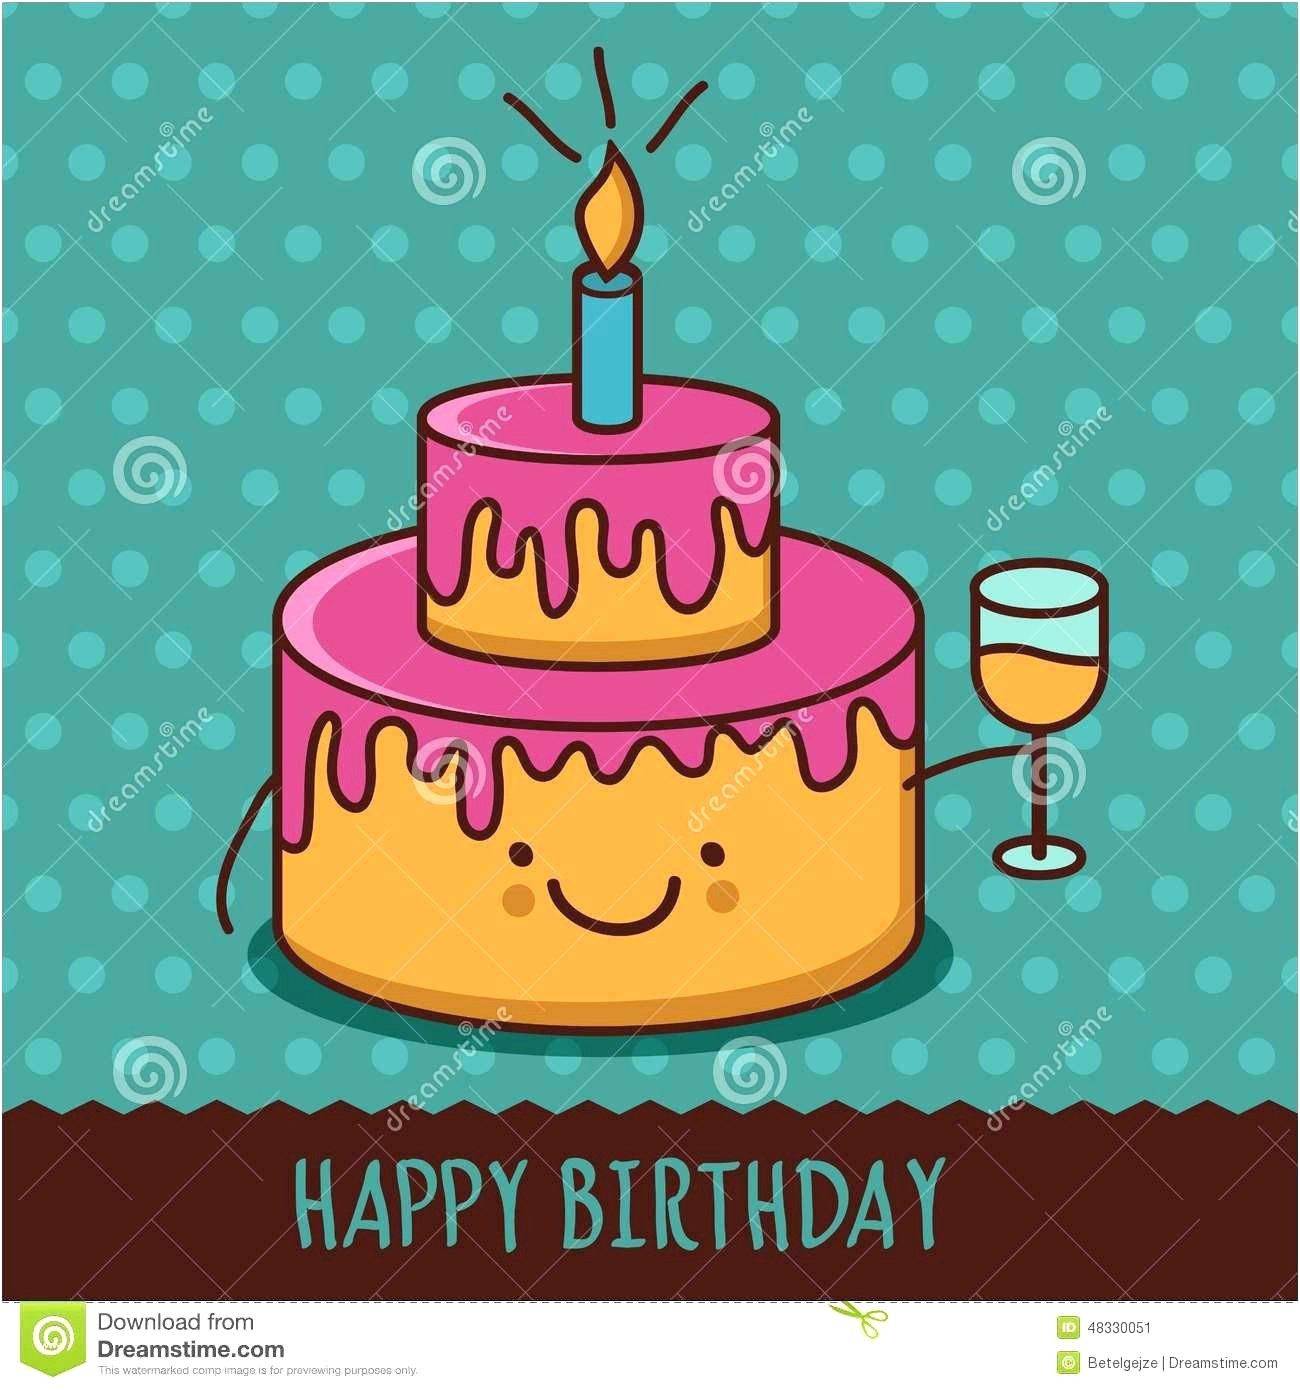 Happy Birthday Animated Card with Name Funny Birthday Greetings Images Elegant Funny Animated